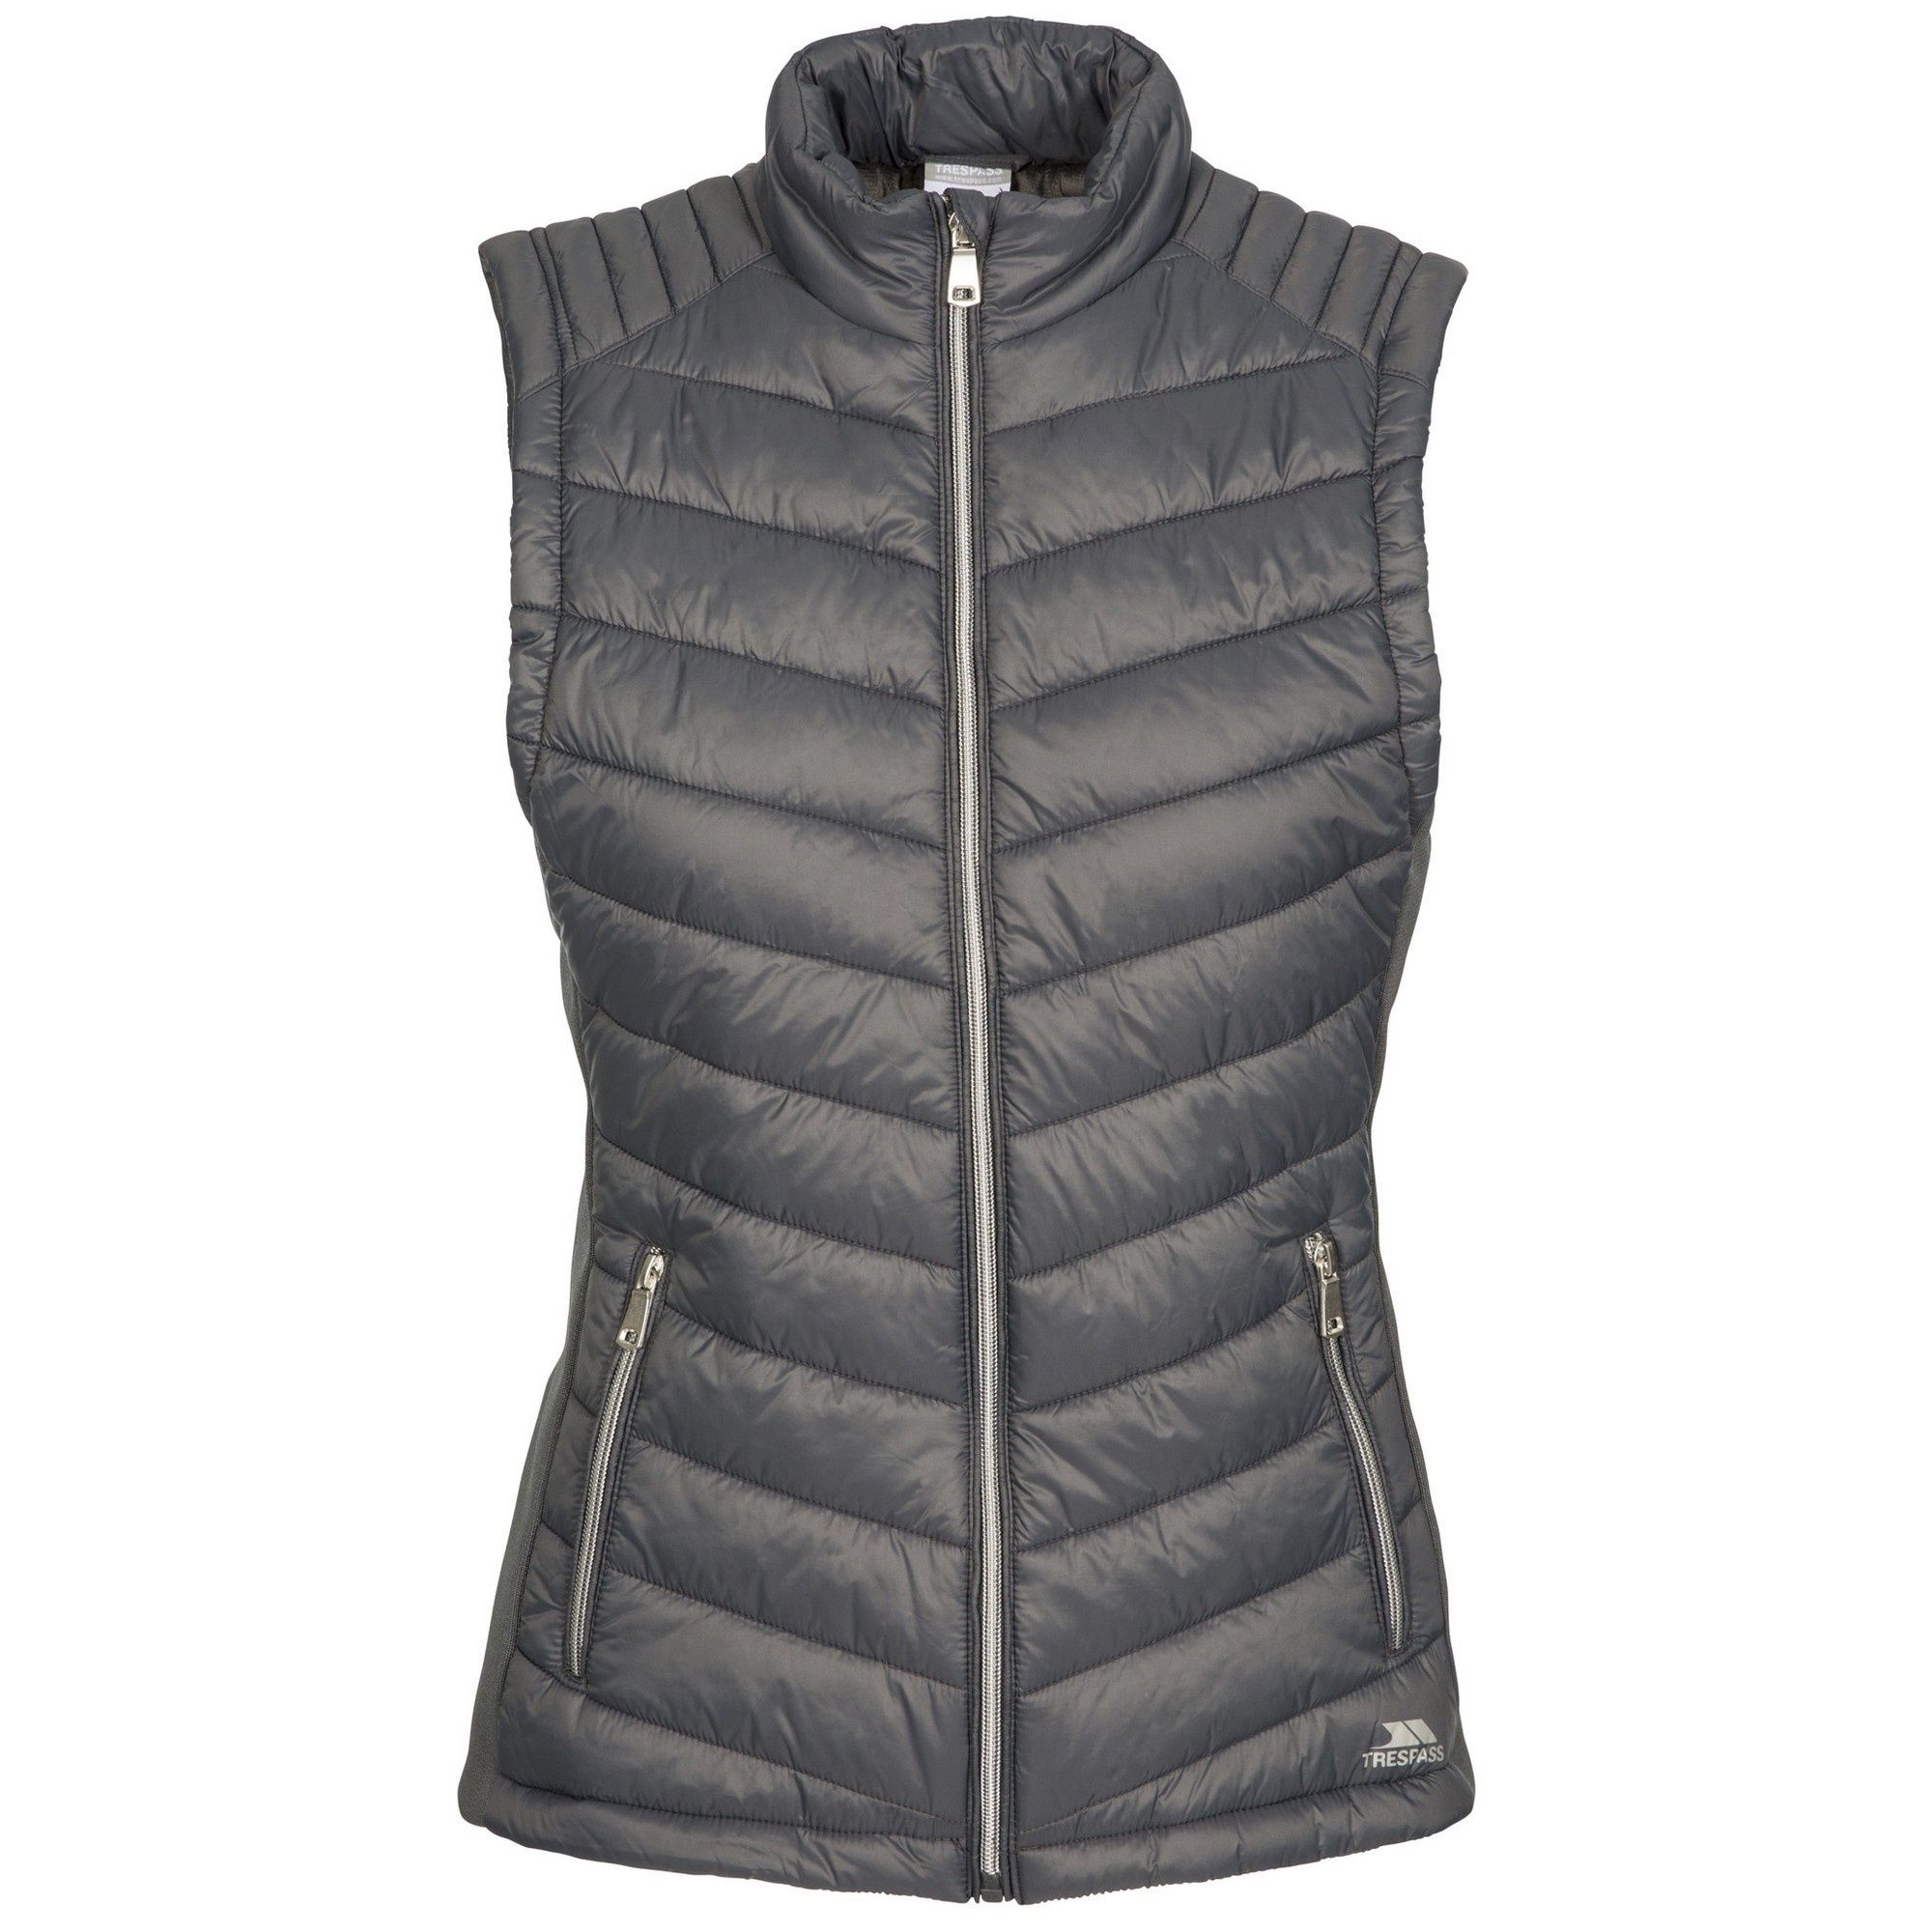 Womens padded gilet with downtouch padding. Furry fleece lining. Rib side panels. 2 x zip pockets. Ideal for wearing outside on a cold day. Shell: 100% Polyamide. Lining: 100% Polyester. Filling: 100% Polyester.